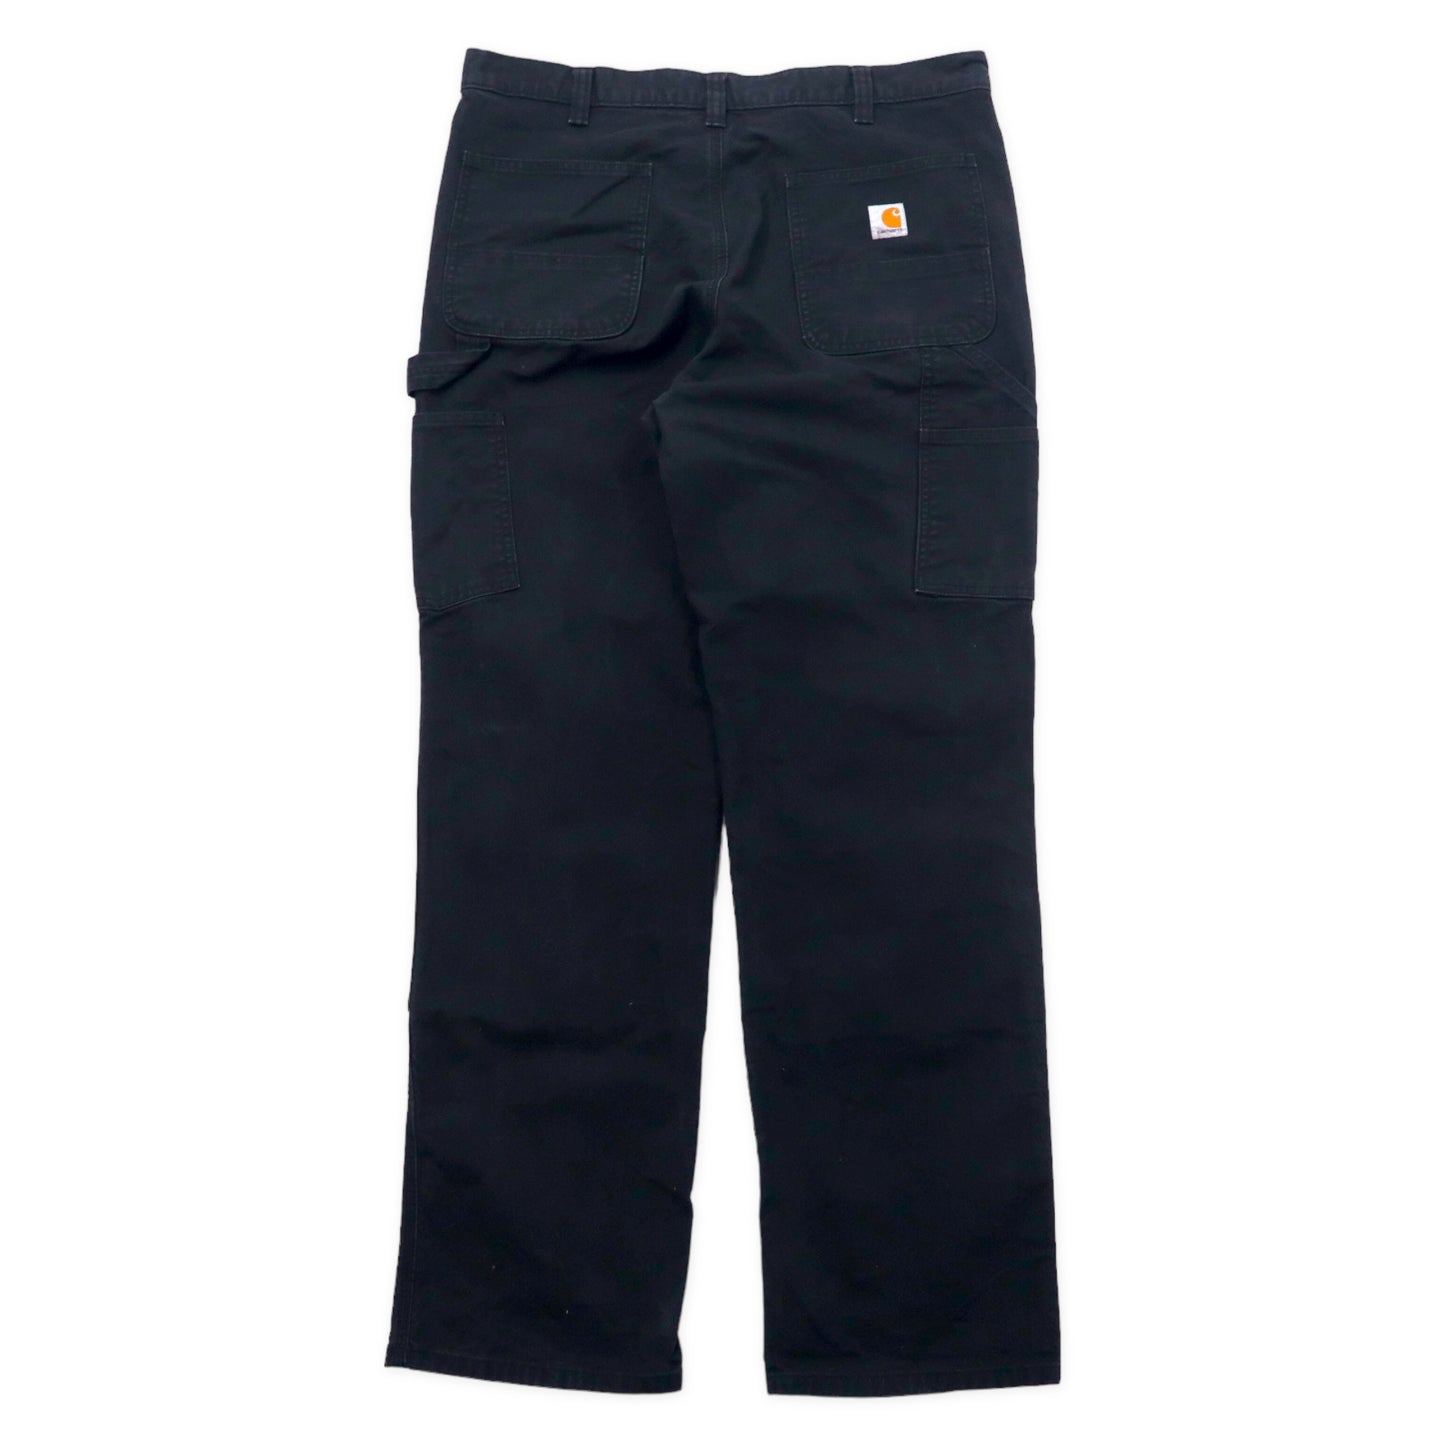 carhartt ダブルニー ダック ペインターパンツ 38 ブラック コットン relaxed fit 103334BK RUGGED FLEX RELAXED FIT DOUBLE FRONT PANT